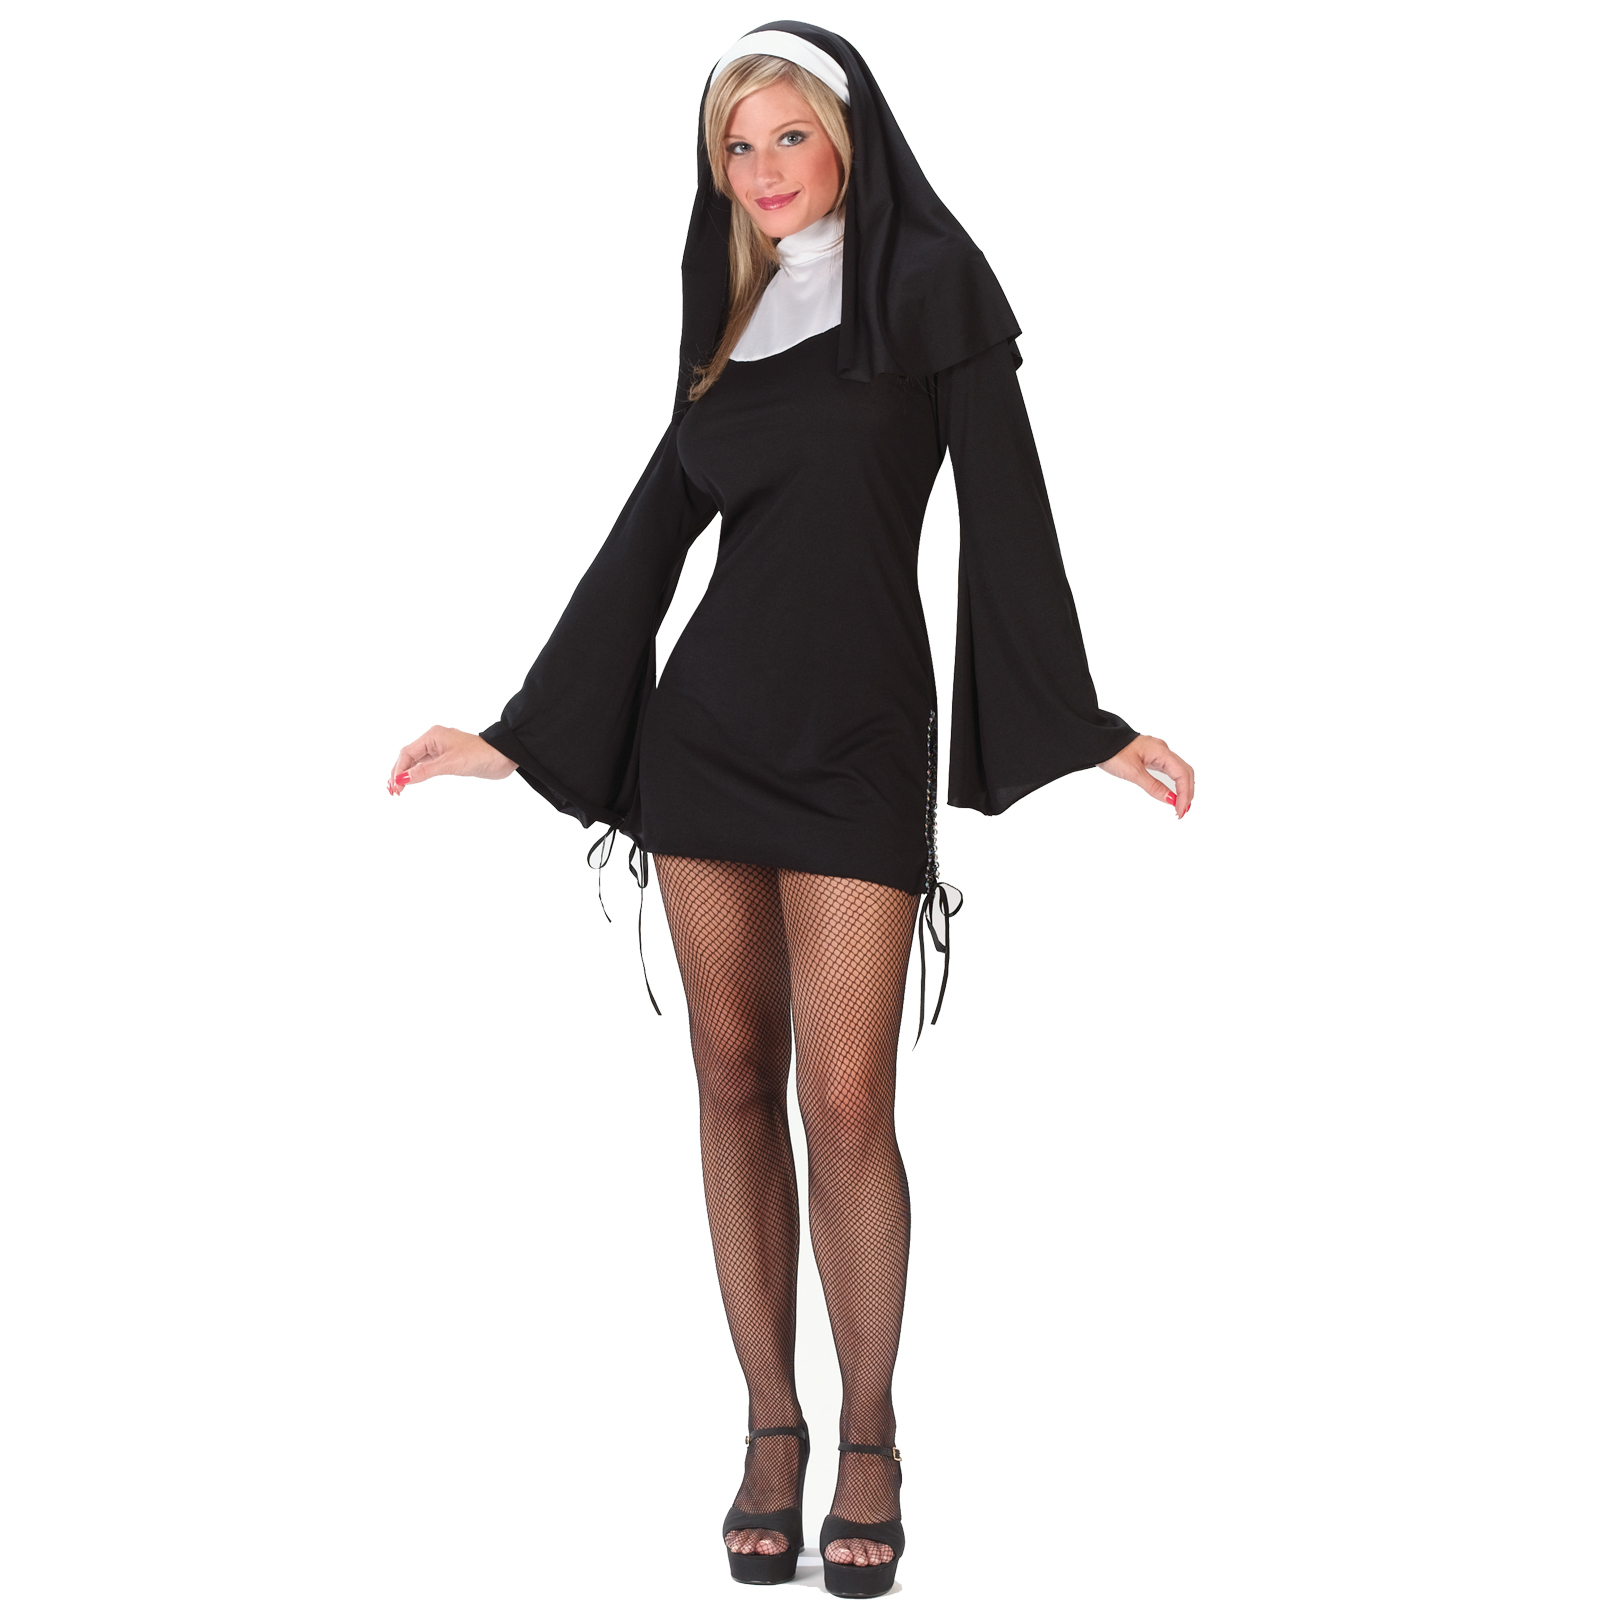 Nuns porn full movie we have sinned lord 6